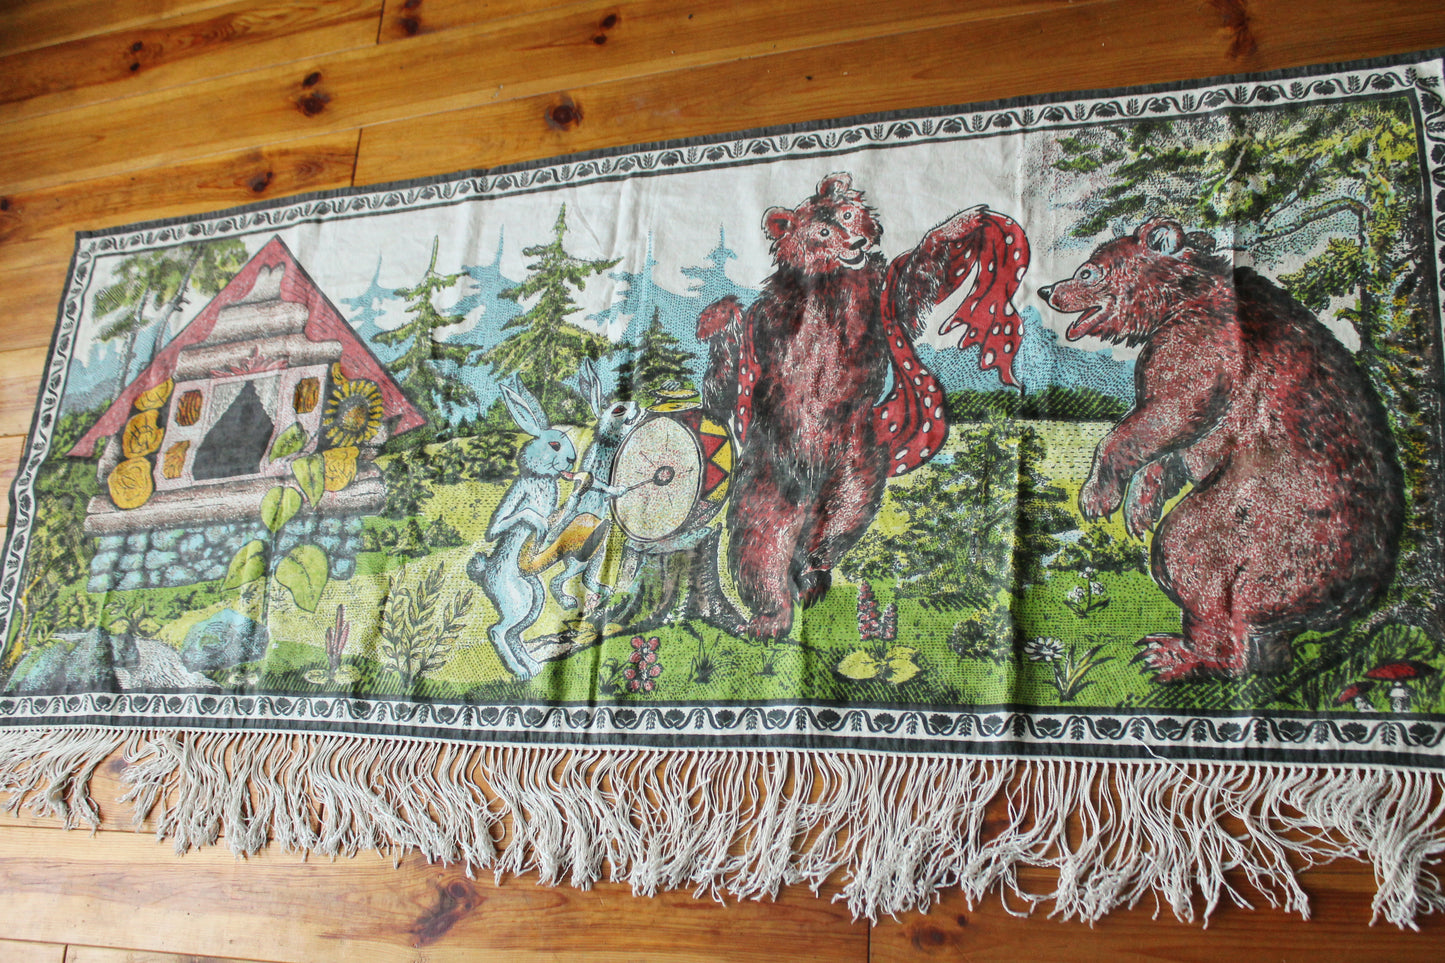 Vintage USSR big cotton tapestry "Fairy tail about bears and hares" - 65 inches - Wall Hanging Rug